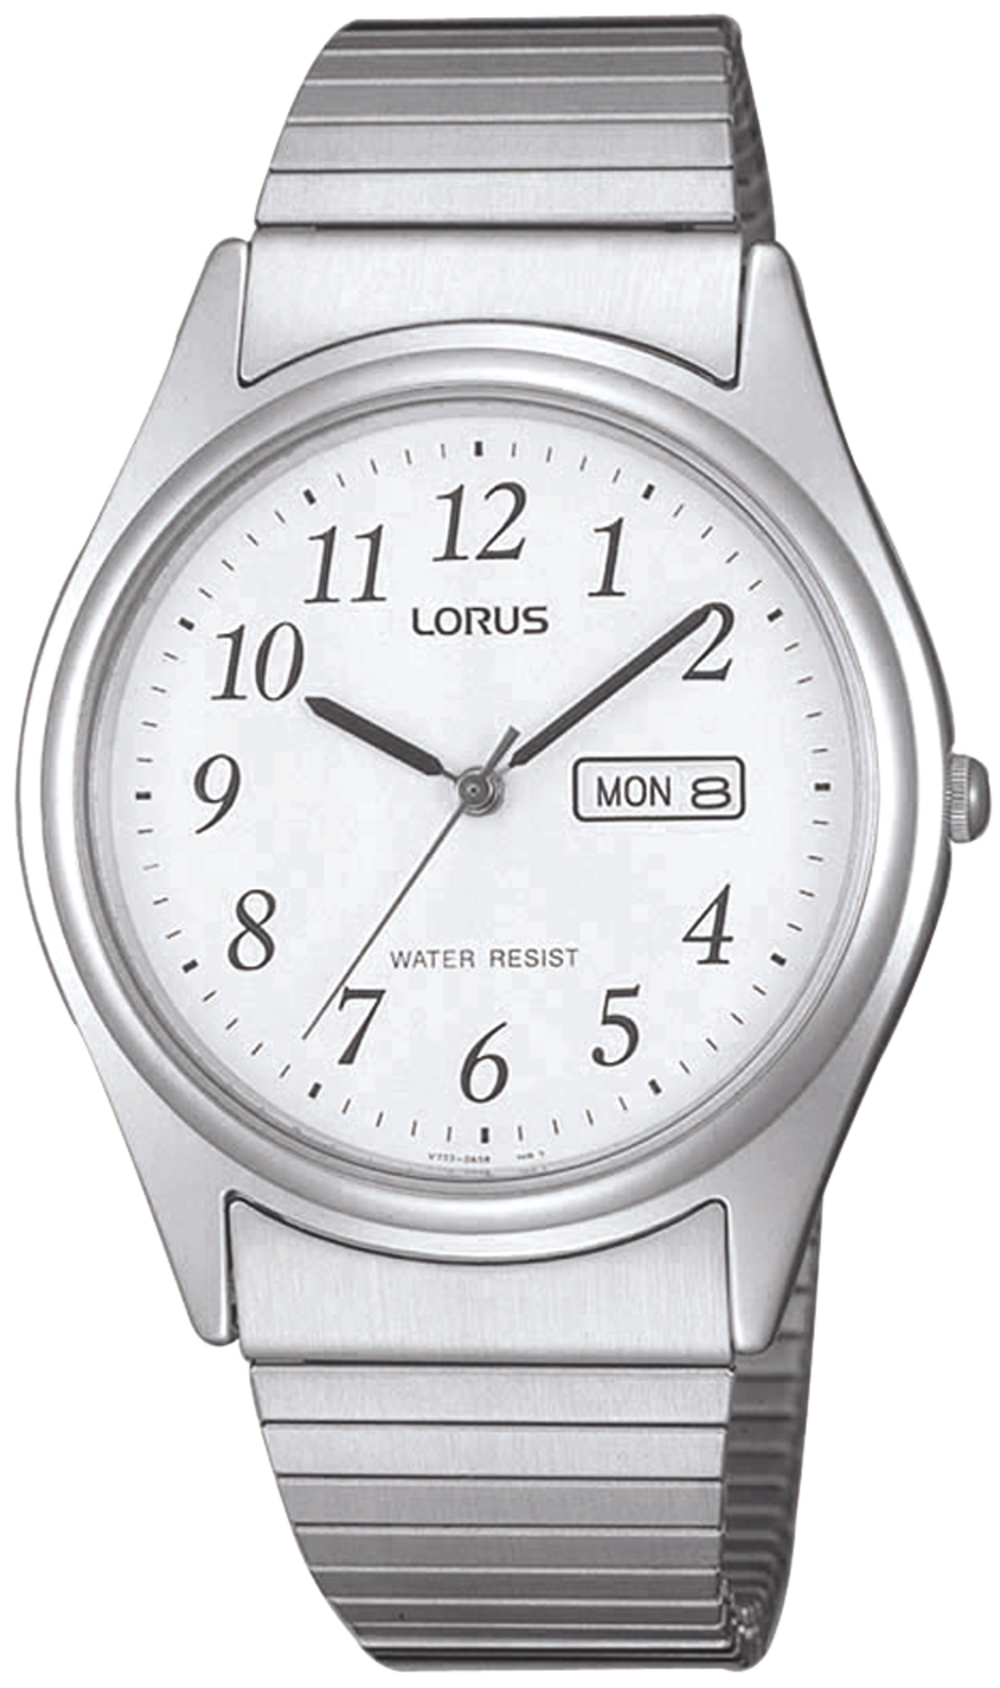 Watch in Lorus Angus Mens & Silver Coote |